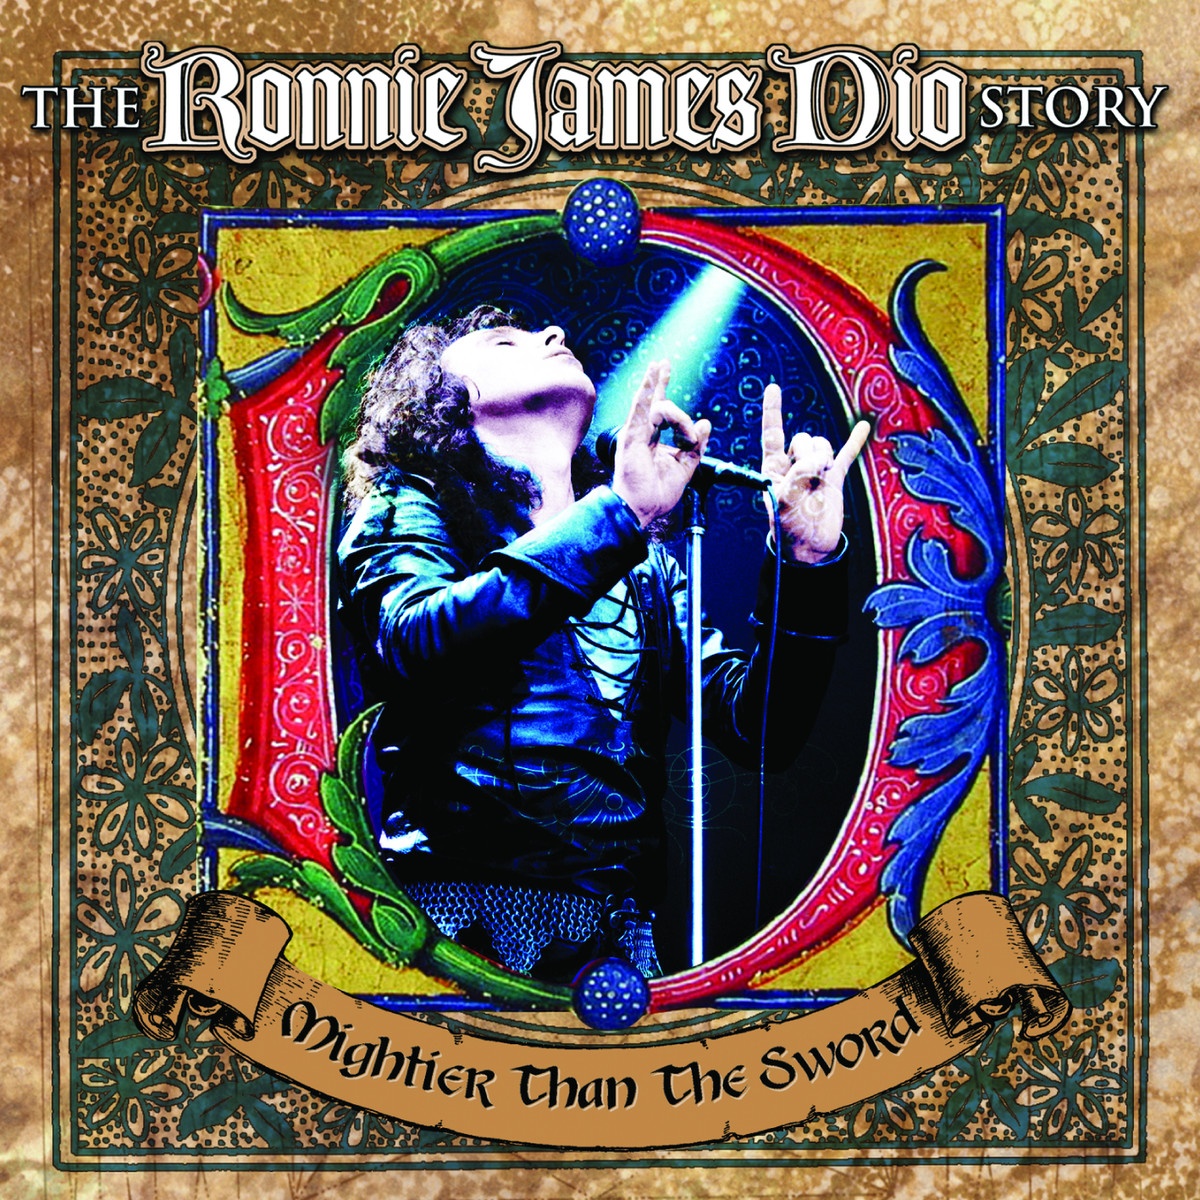 The Ronnie James Dio Story - Mightier Than The Sword